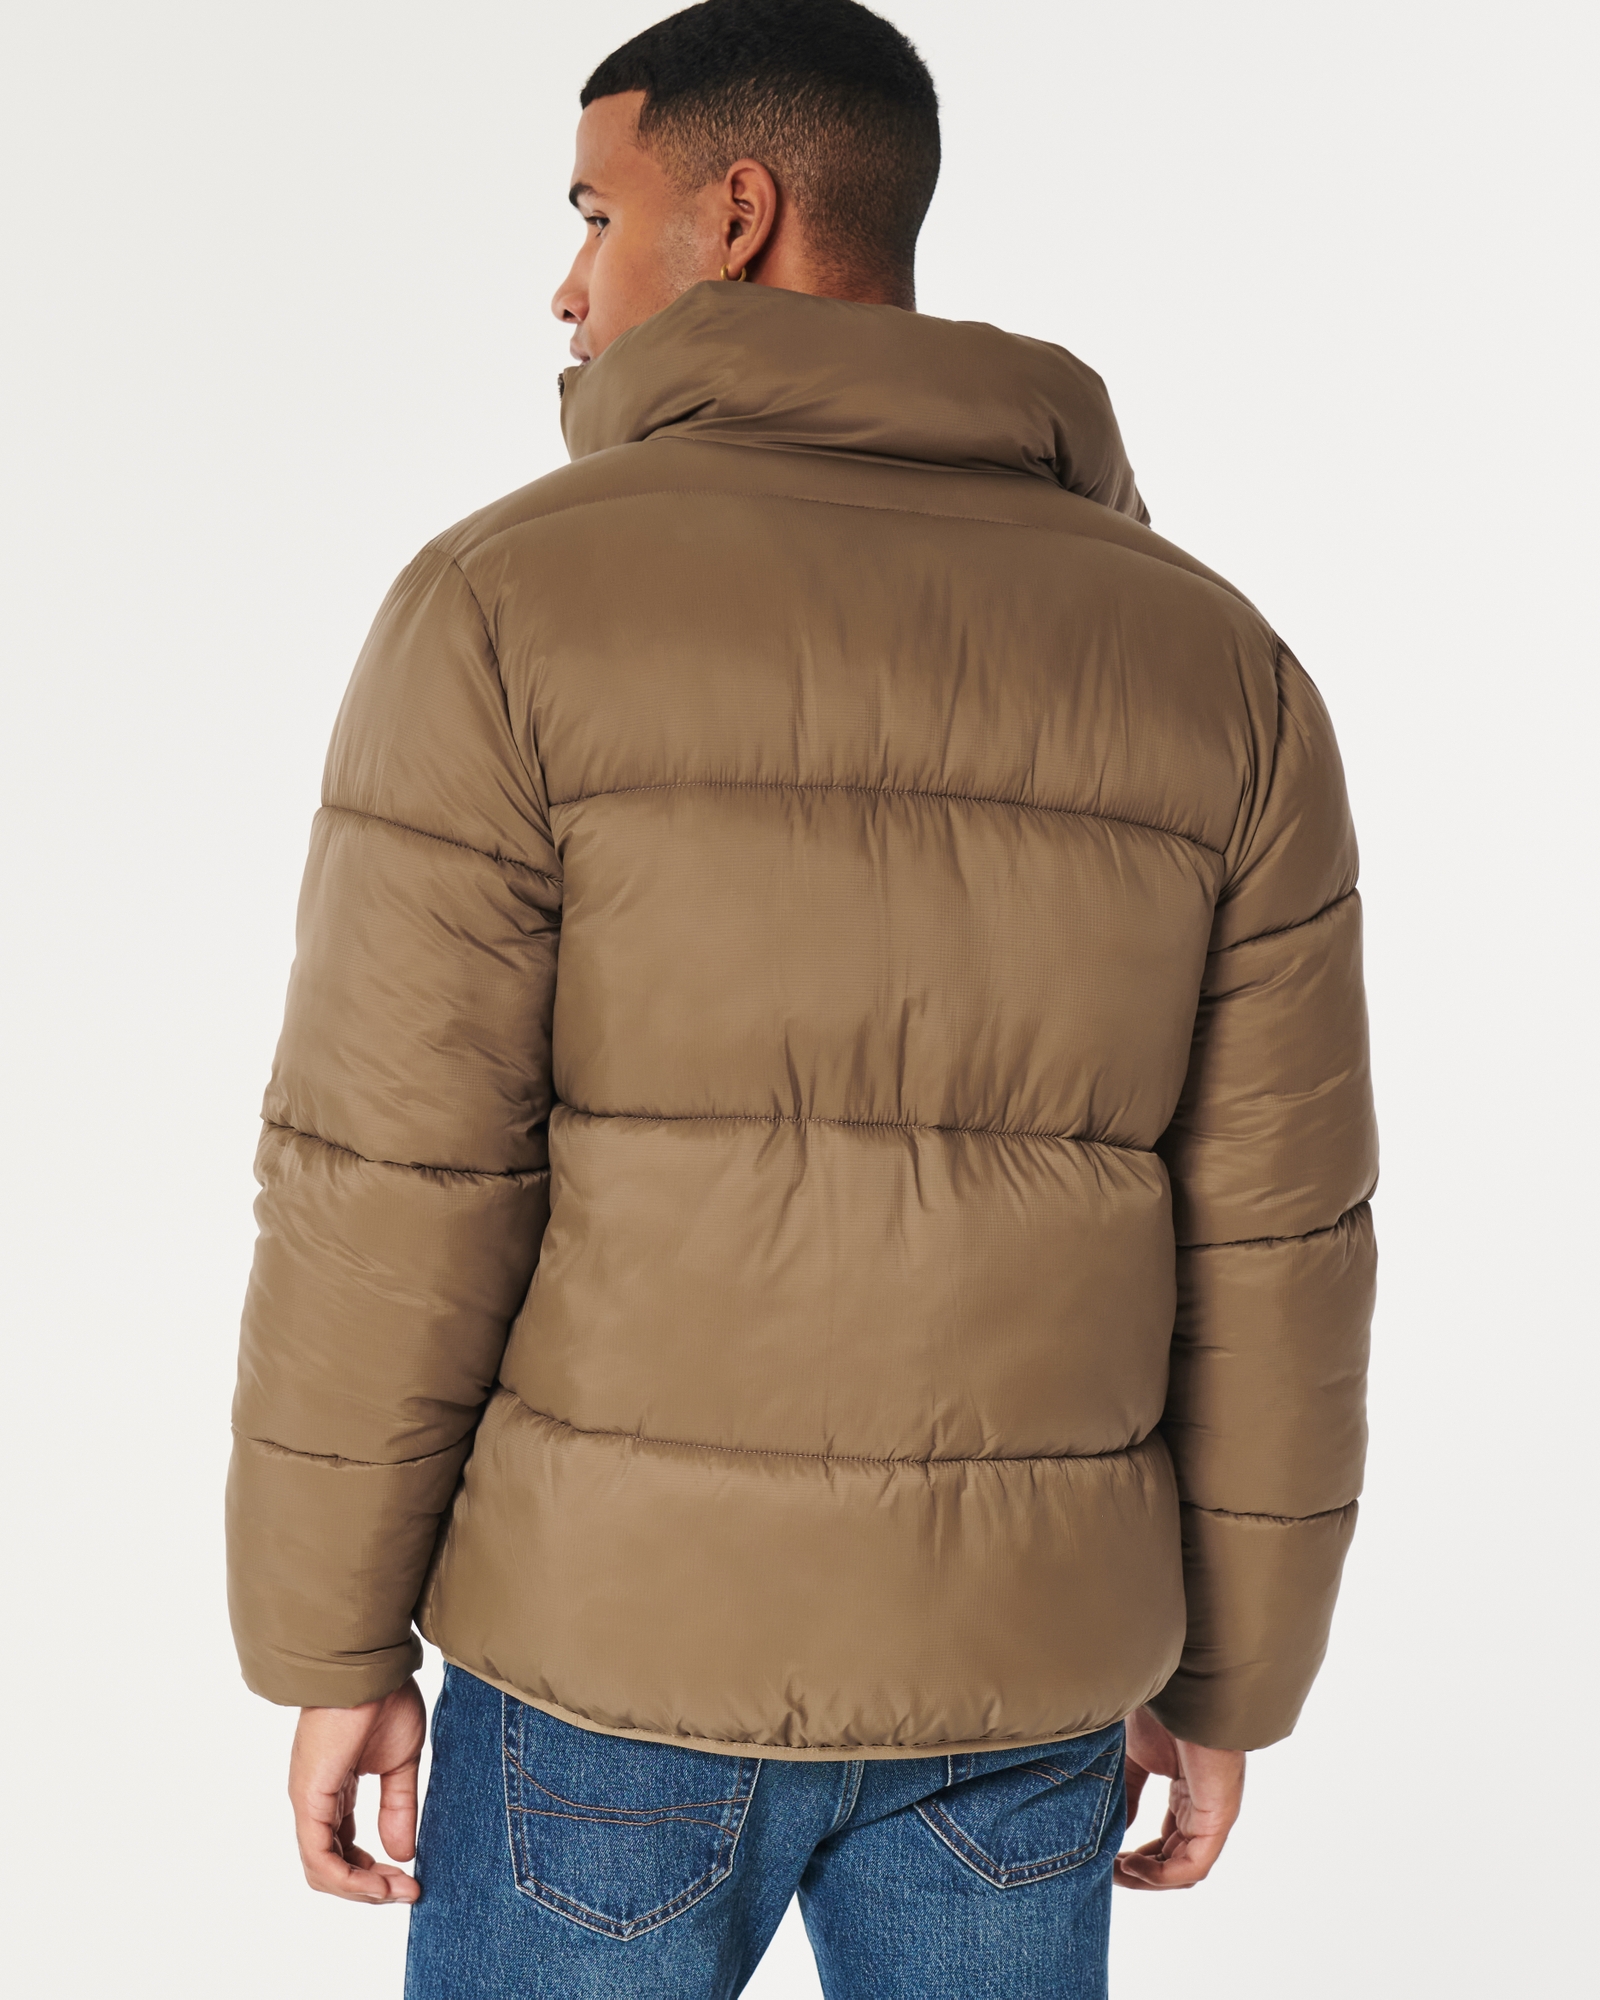 NWT HOLLISTER MEN'S ULTIMATE REVERSIBLE PUFFER JACKET, Sizes L / XL, $120